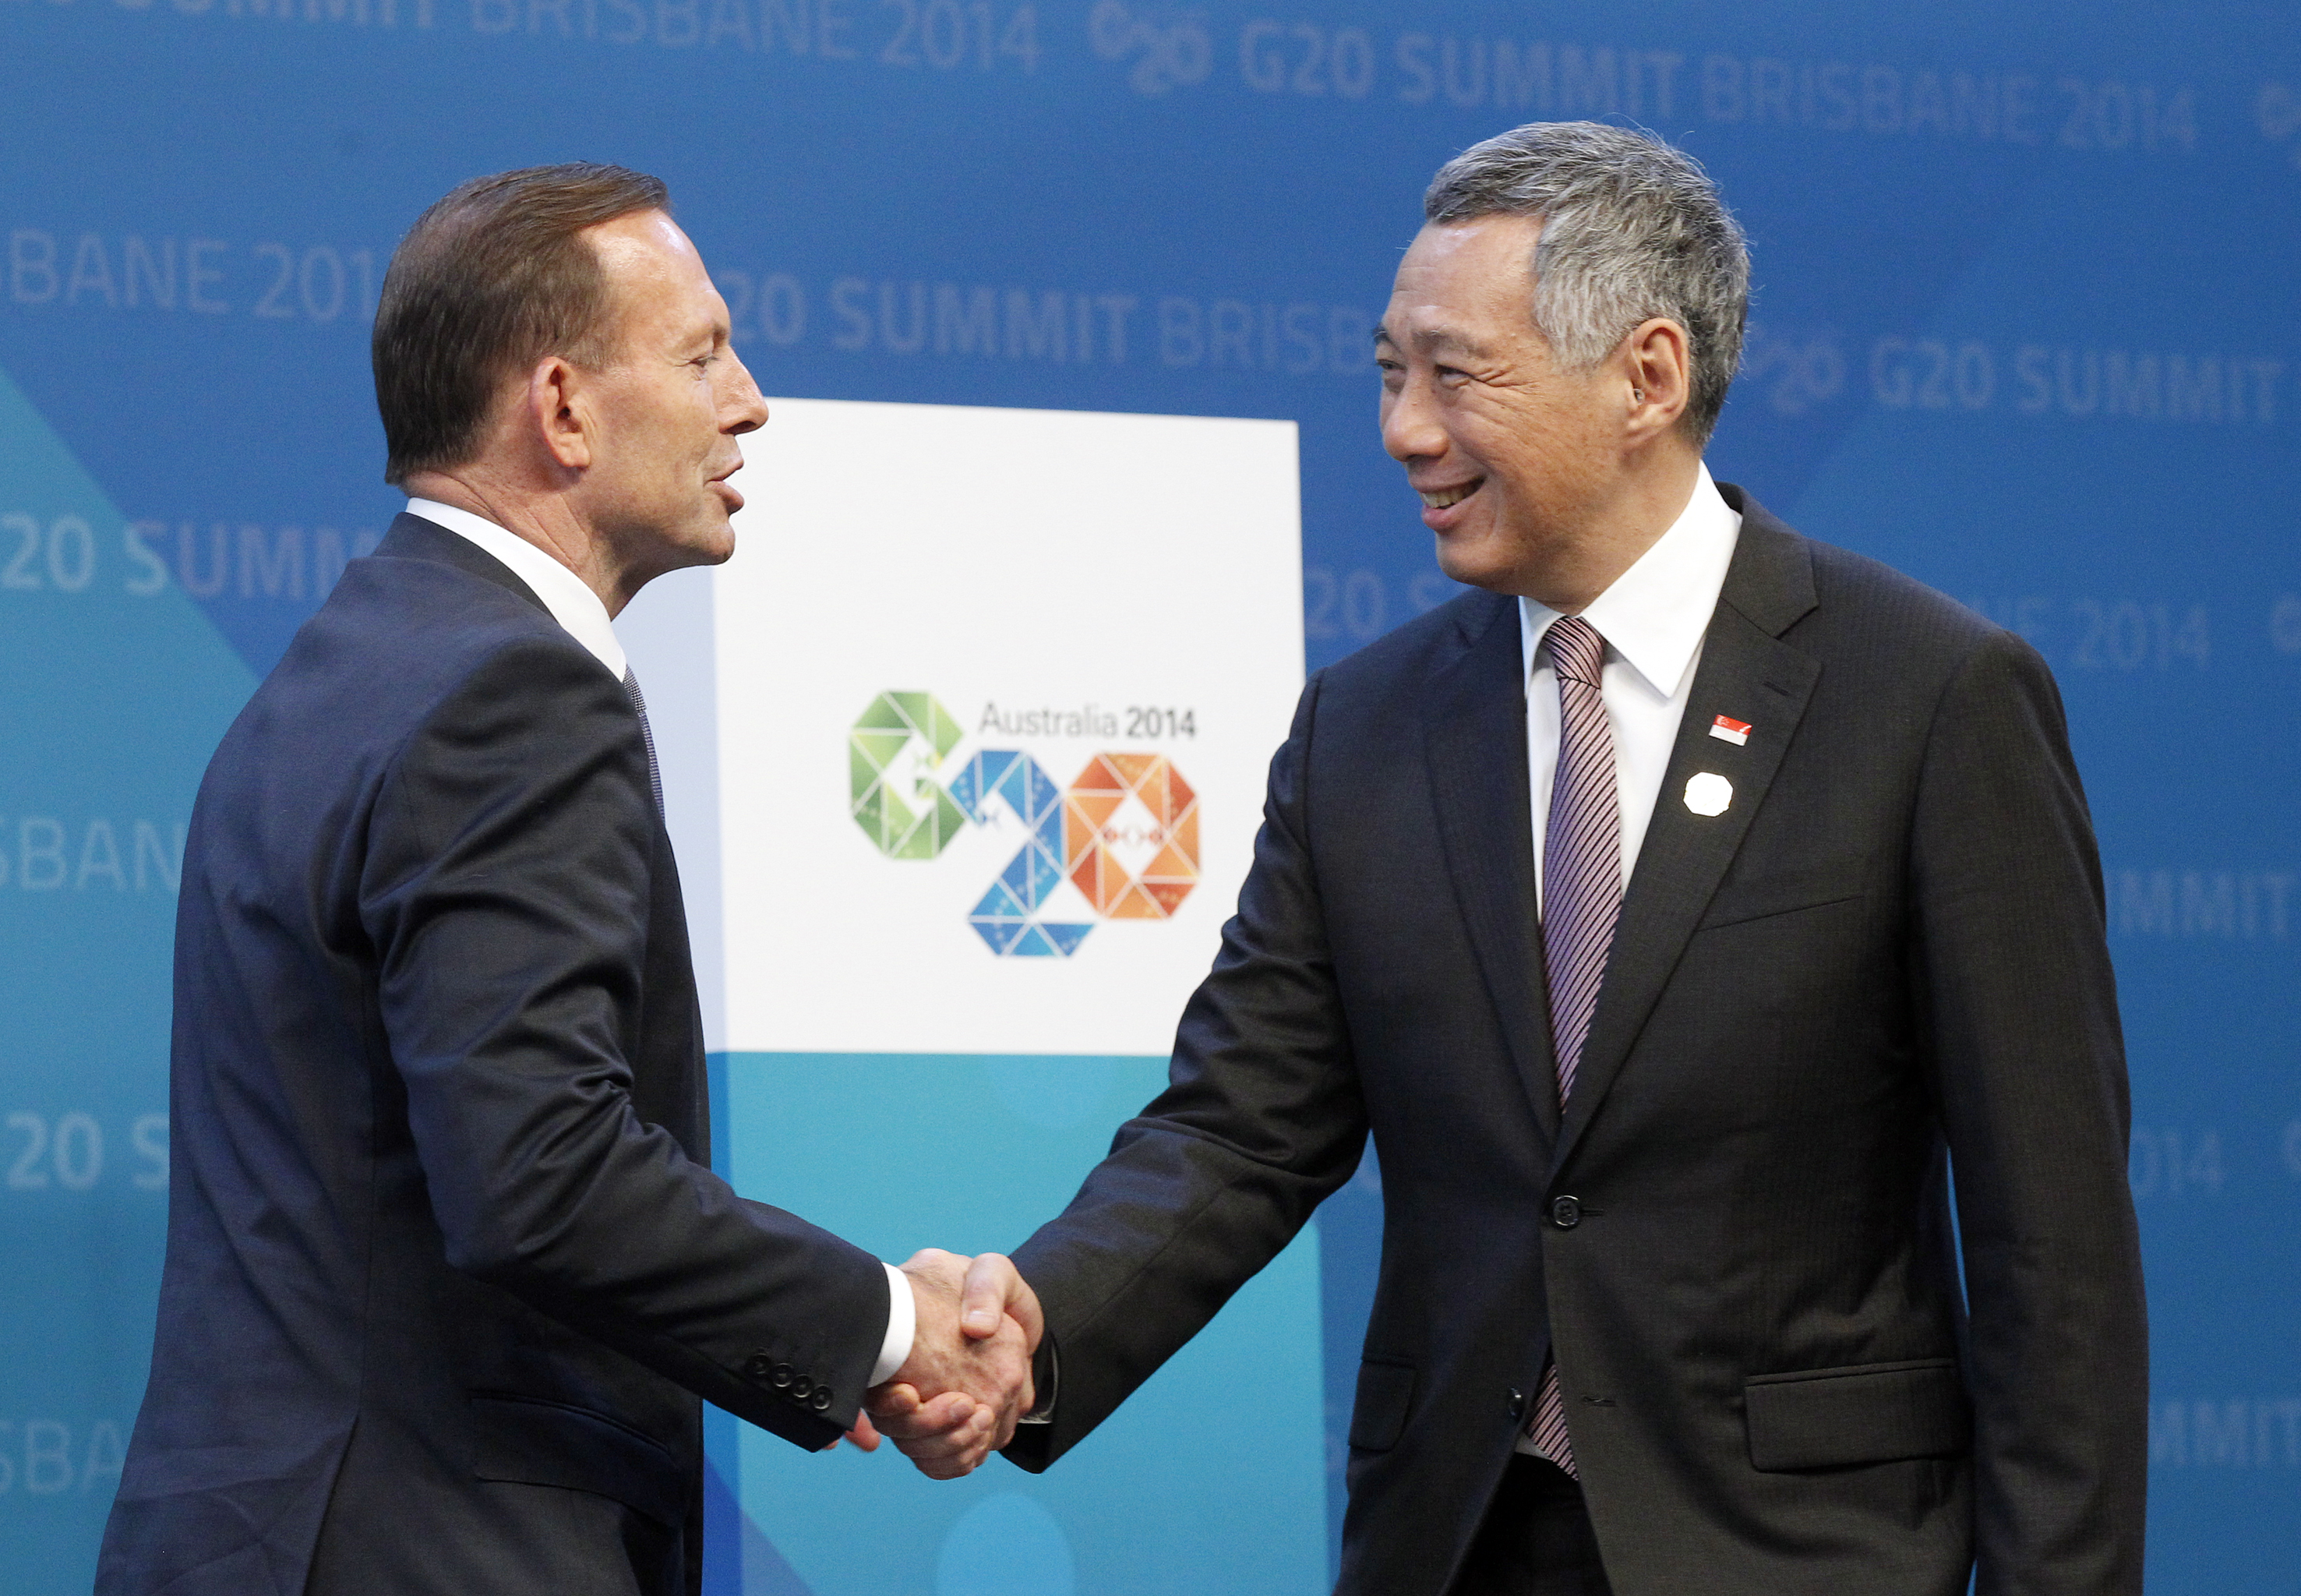 Prime Minister Lee Hsien Loong at the G20 Summit on 15 to 16 November in Brisbane, Australia (ST Photo © Singapore Press Holdings Limited. Reproduced with permission)